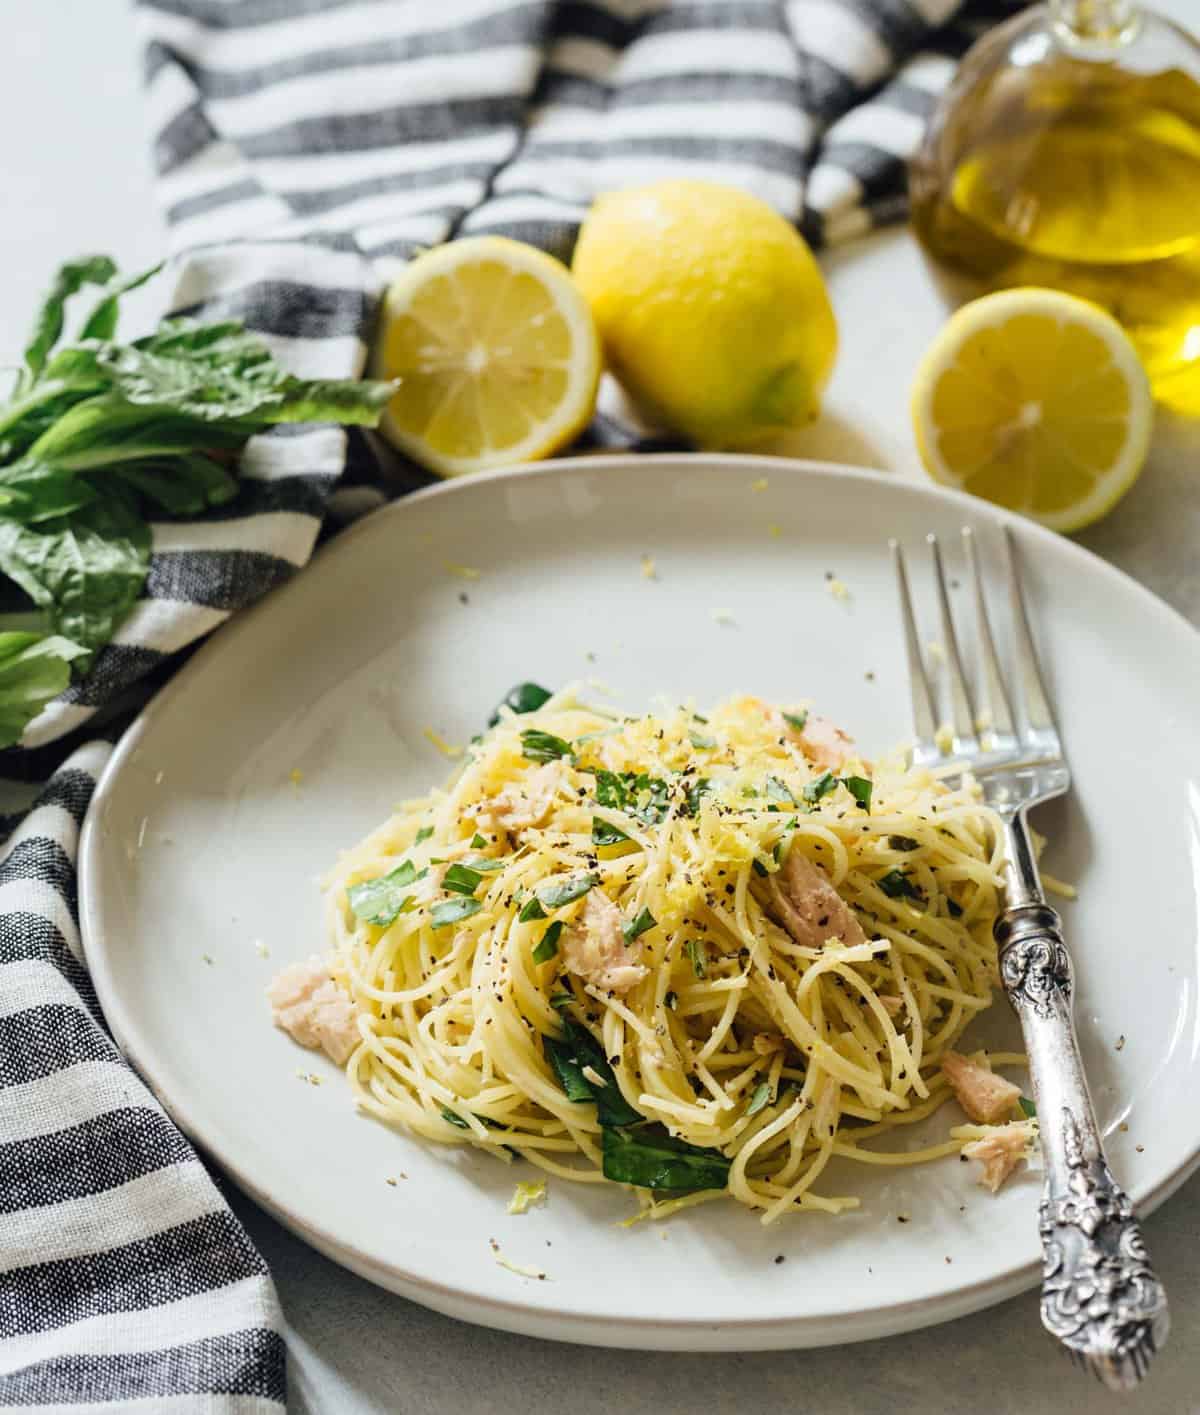 A refreshingly light yet bold and easy zesty pasta dish that uses canned tuna and lemon in a way that you may not have thought to use before!